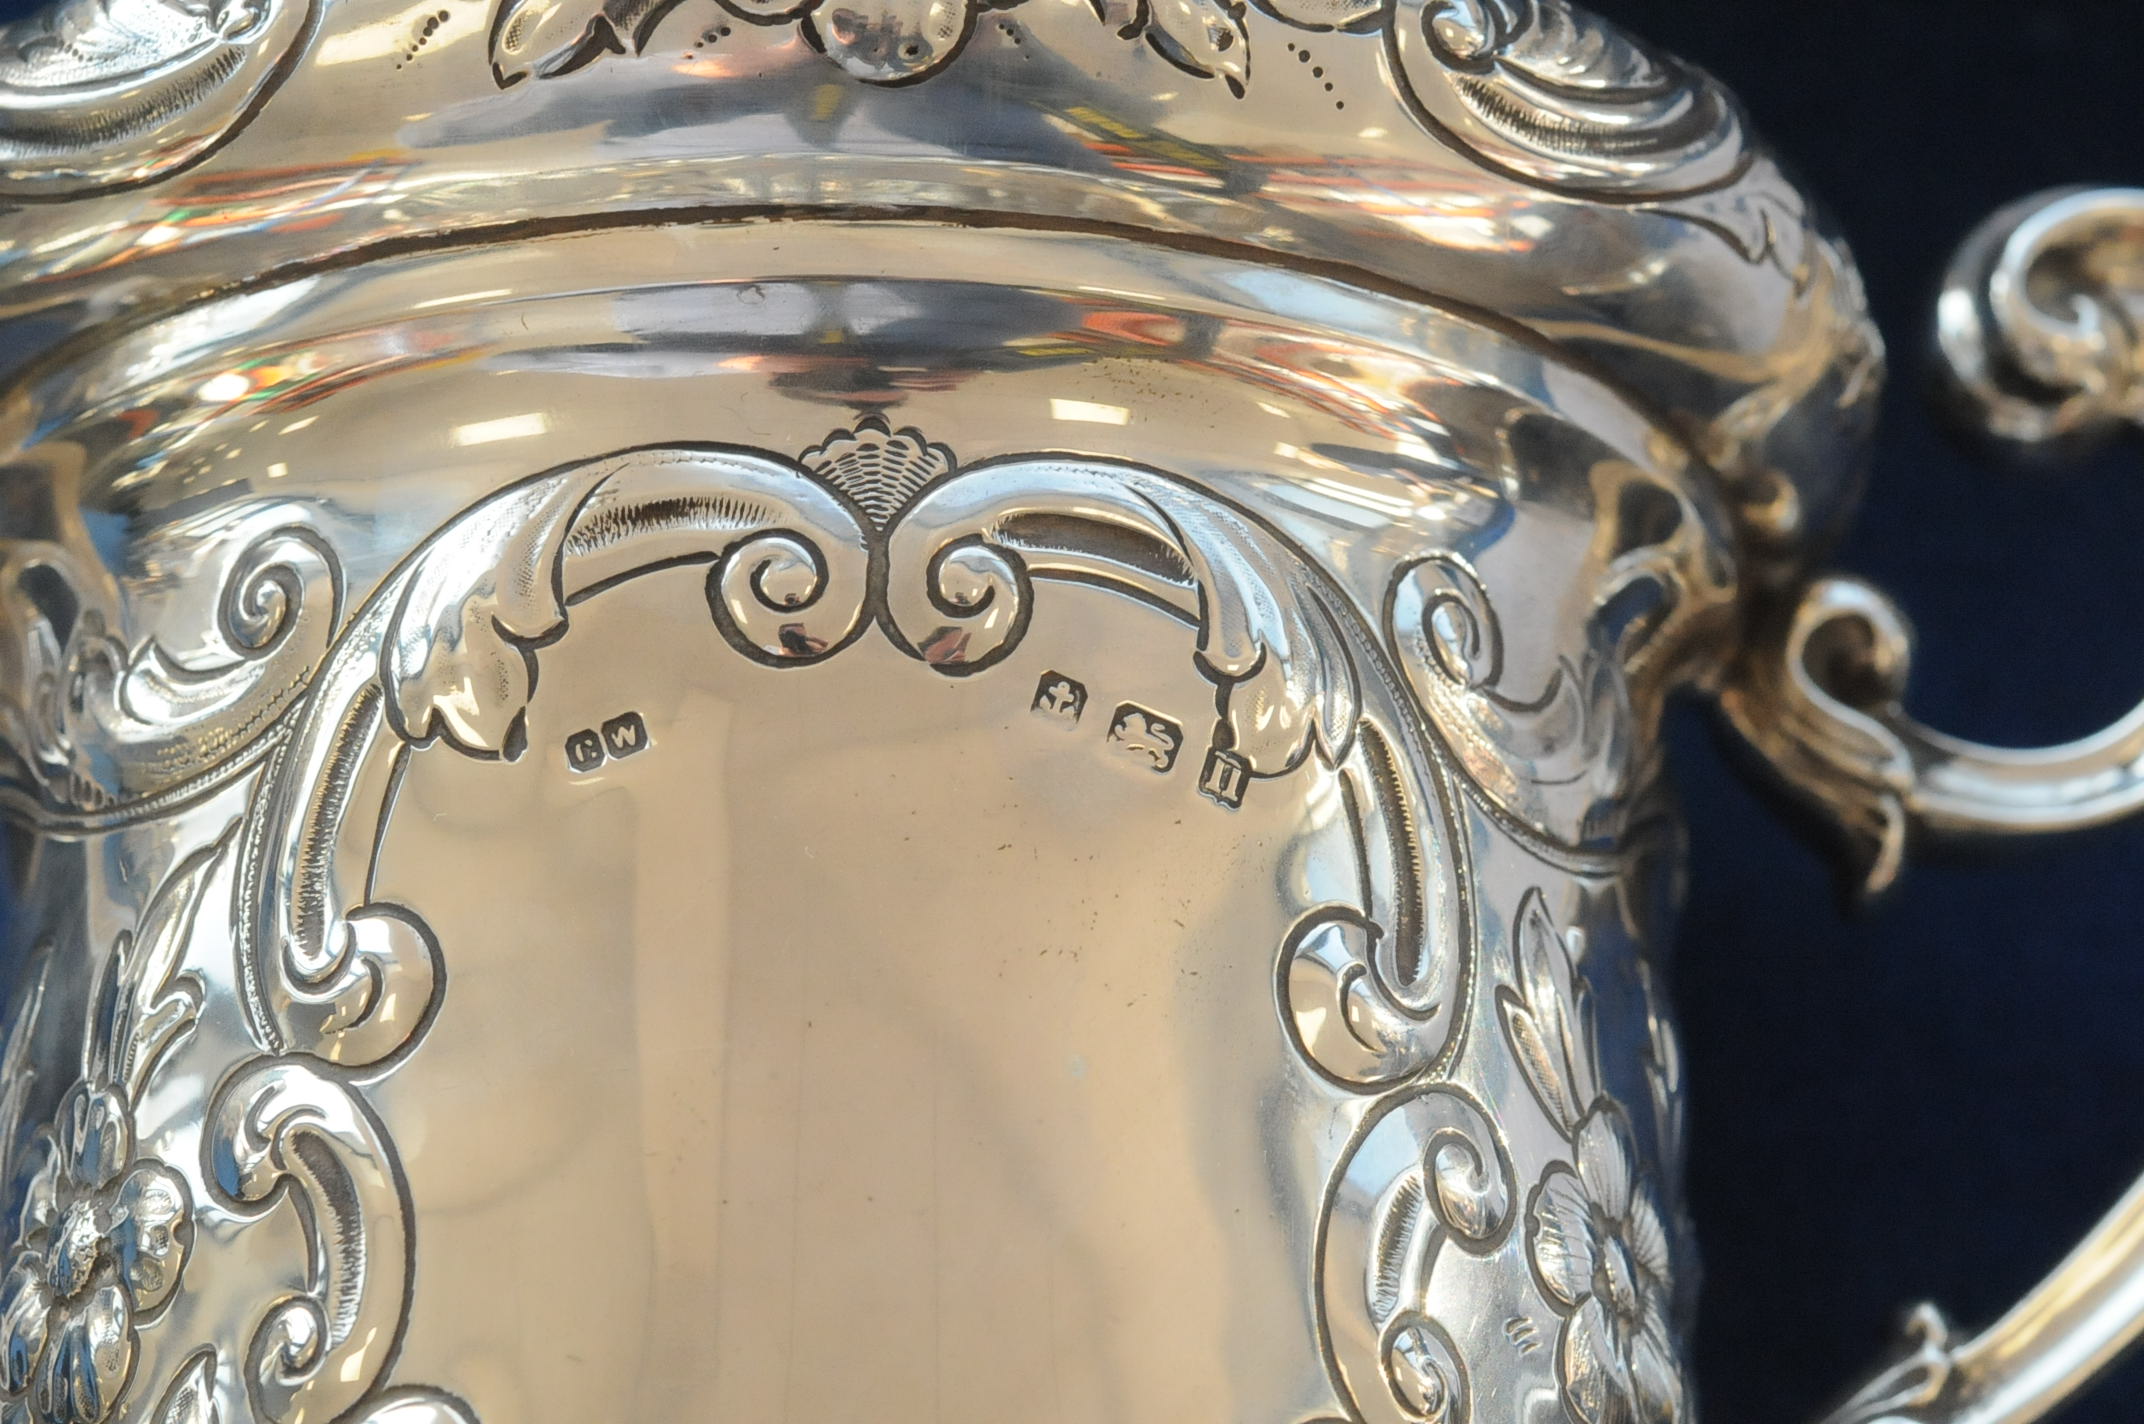 An Edwardian silver biscuit barrel by CW, twin handled with raised floral and rococo motifs, - Image 3 of 7